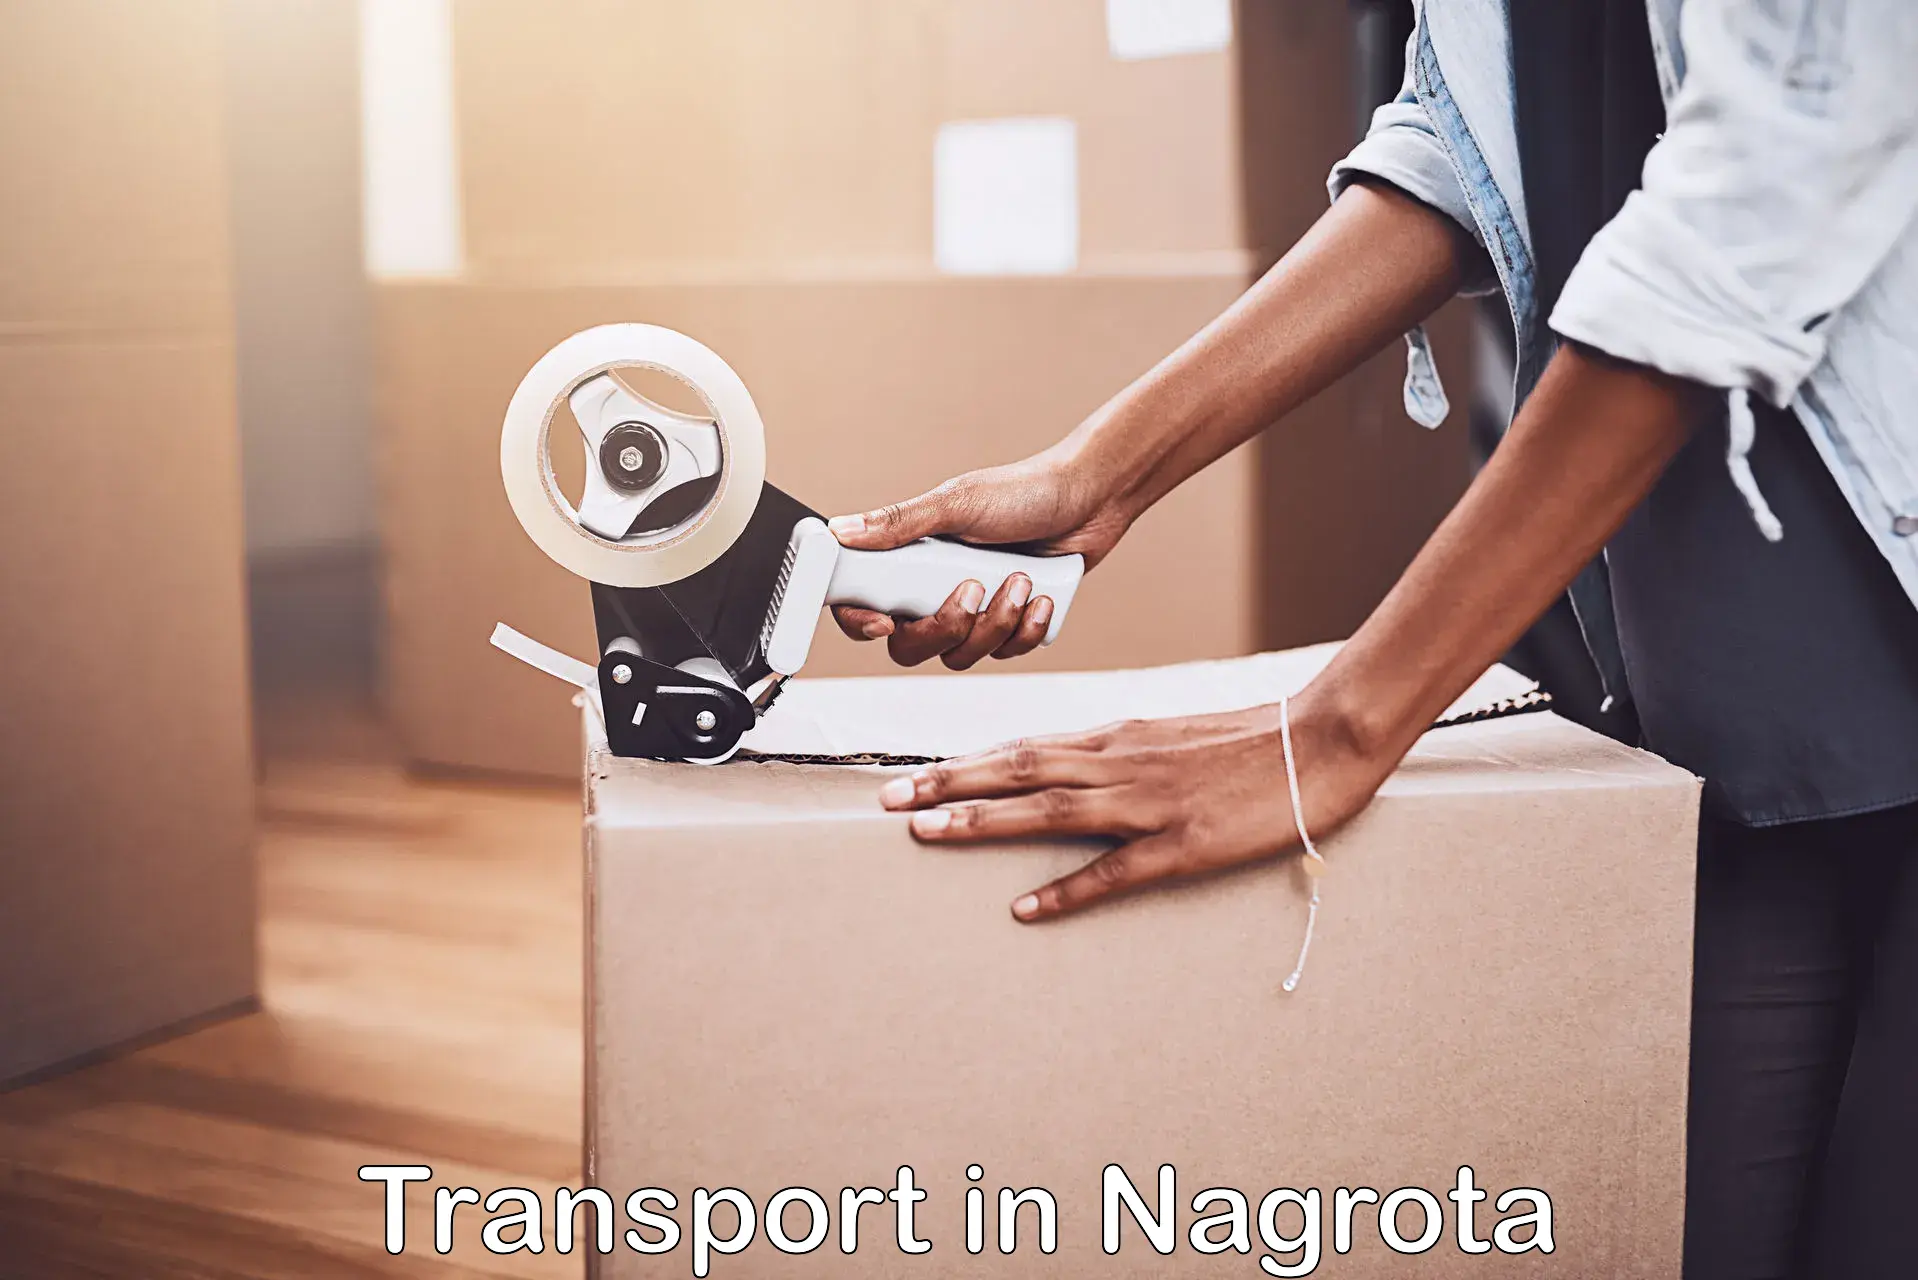 Luggage transport services in Nagrota